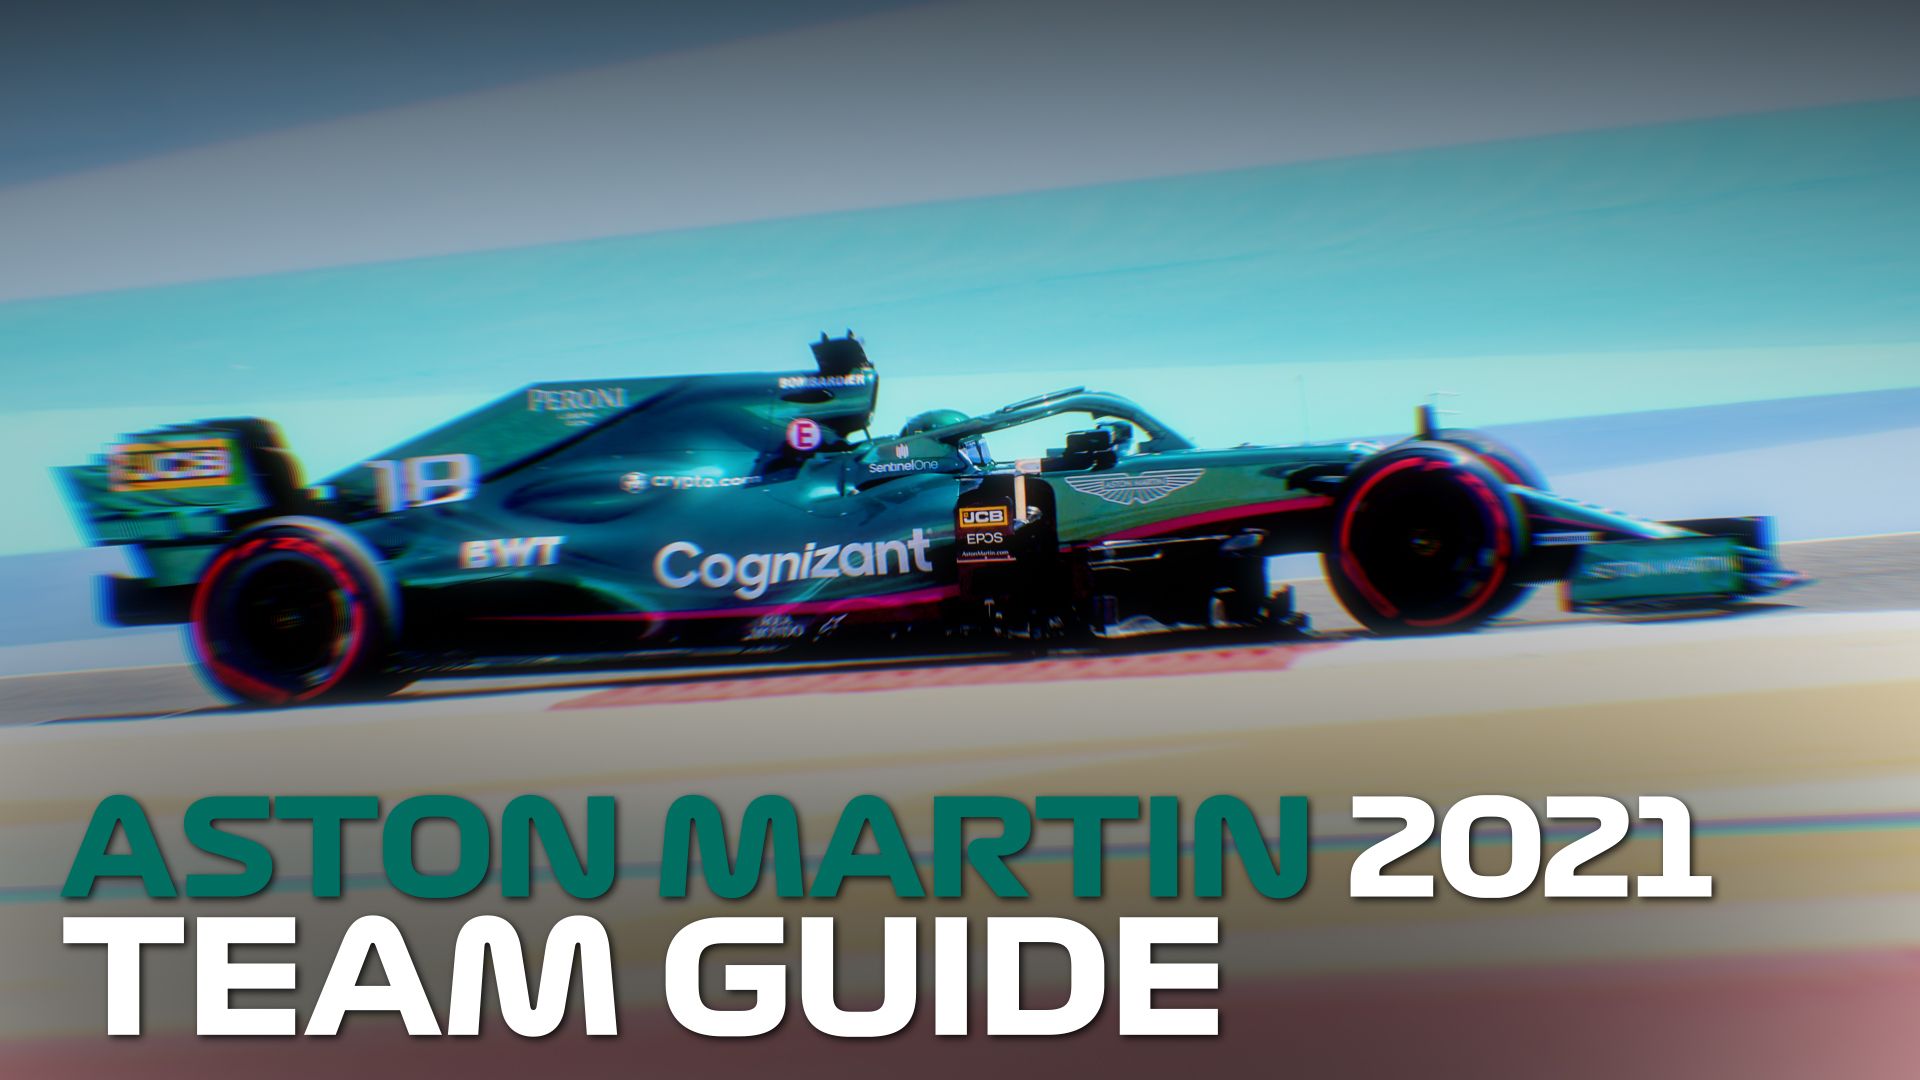 SEASON PREVIEW: The hopes and fears for every Aston Martin fan. Formula 1®